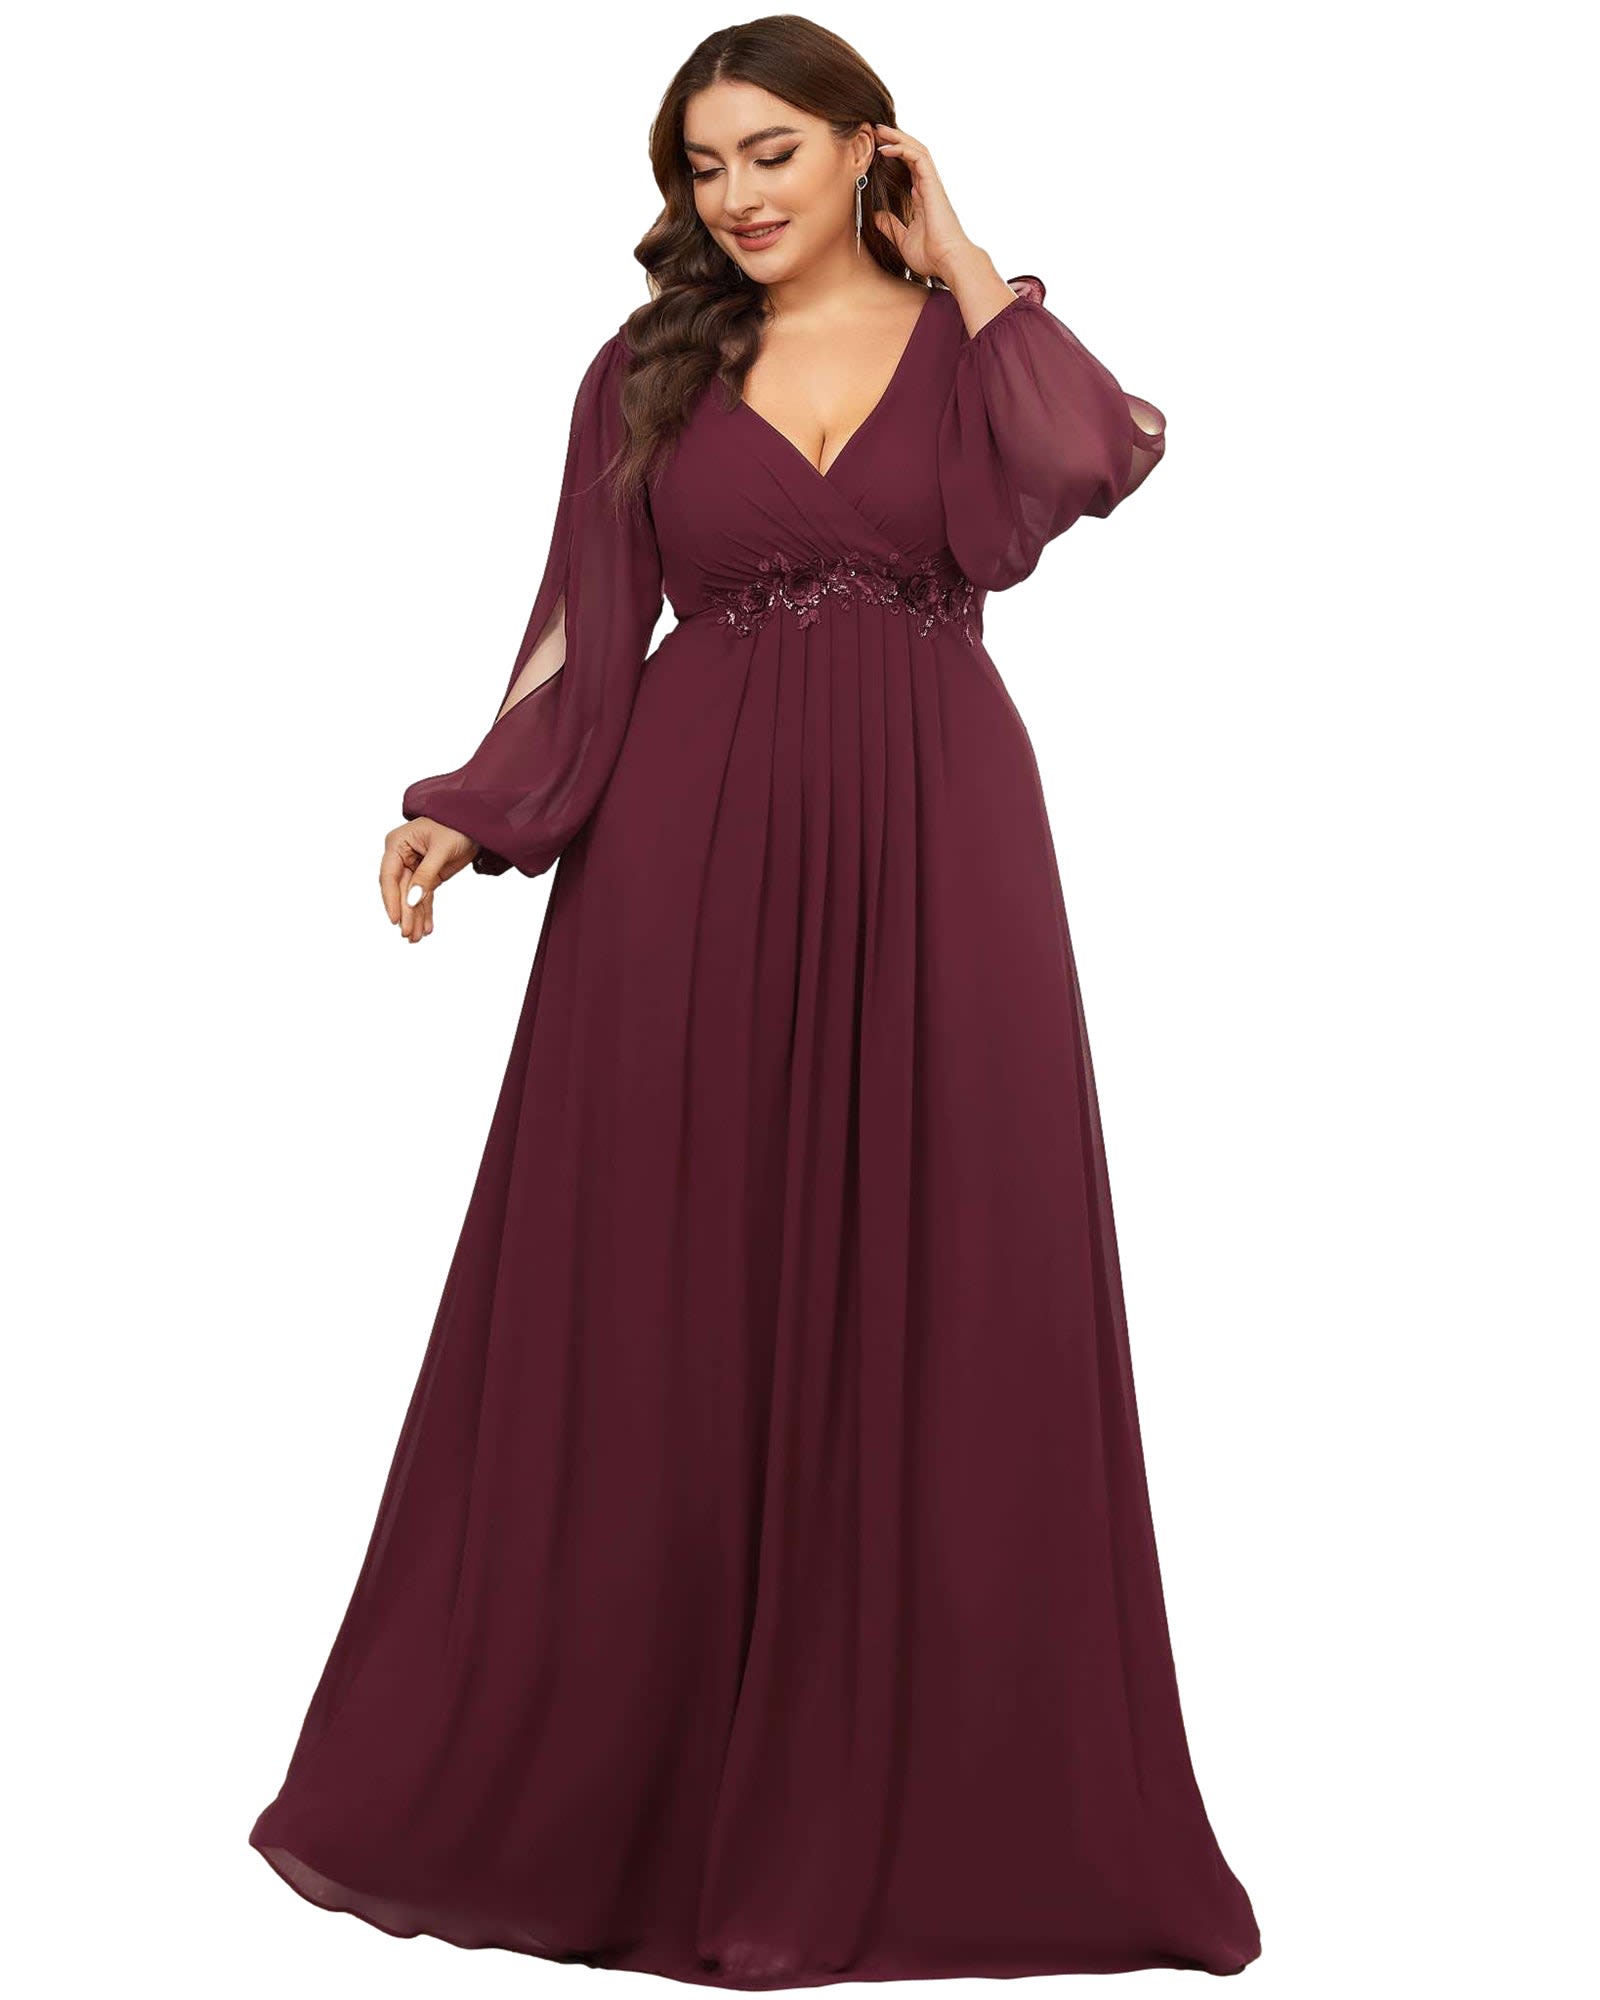 Red Sequined Maroon Evening Dress With Detachable Train, Deep V Neck,  Appliques, And Sweep Train Perfect For Red Carpet Events And Pageants  DRE310K From Baiy31, $133.83 | DHgate.Com